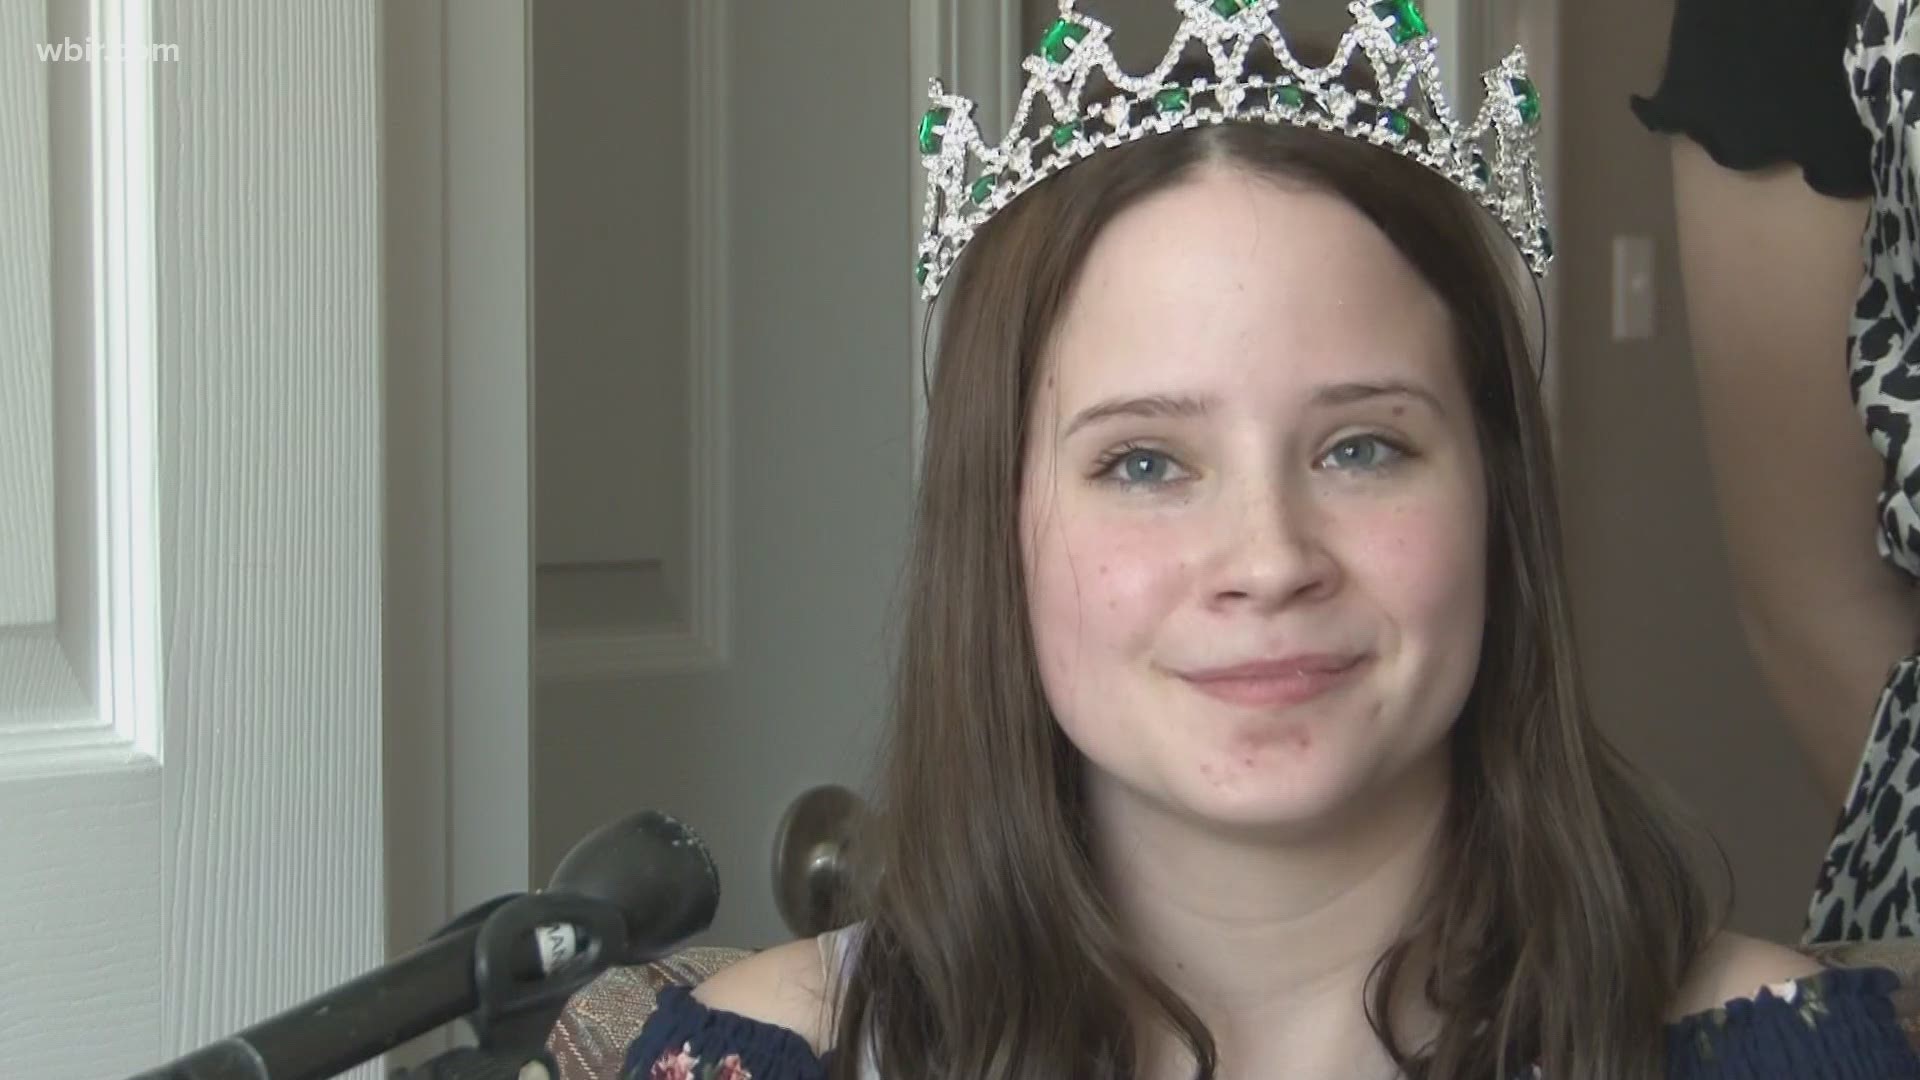 Gatlinburg is getting ready for extra sparkles and sashes. Queens from East Tennessee will compete in their first-ever state special needs pageant.